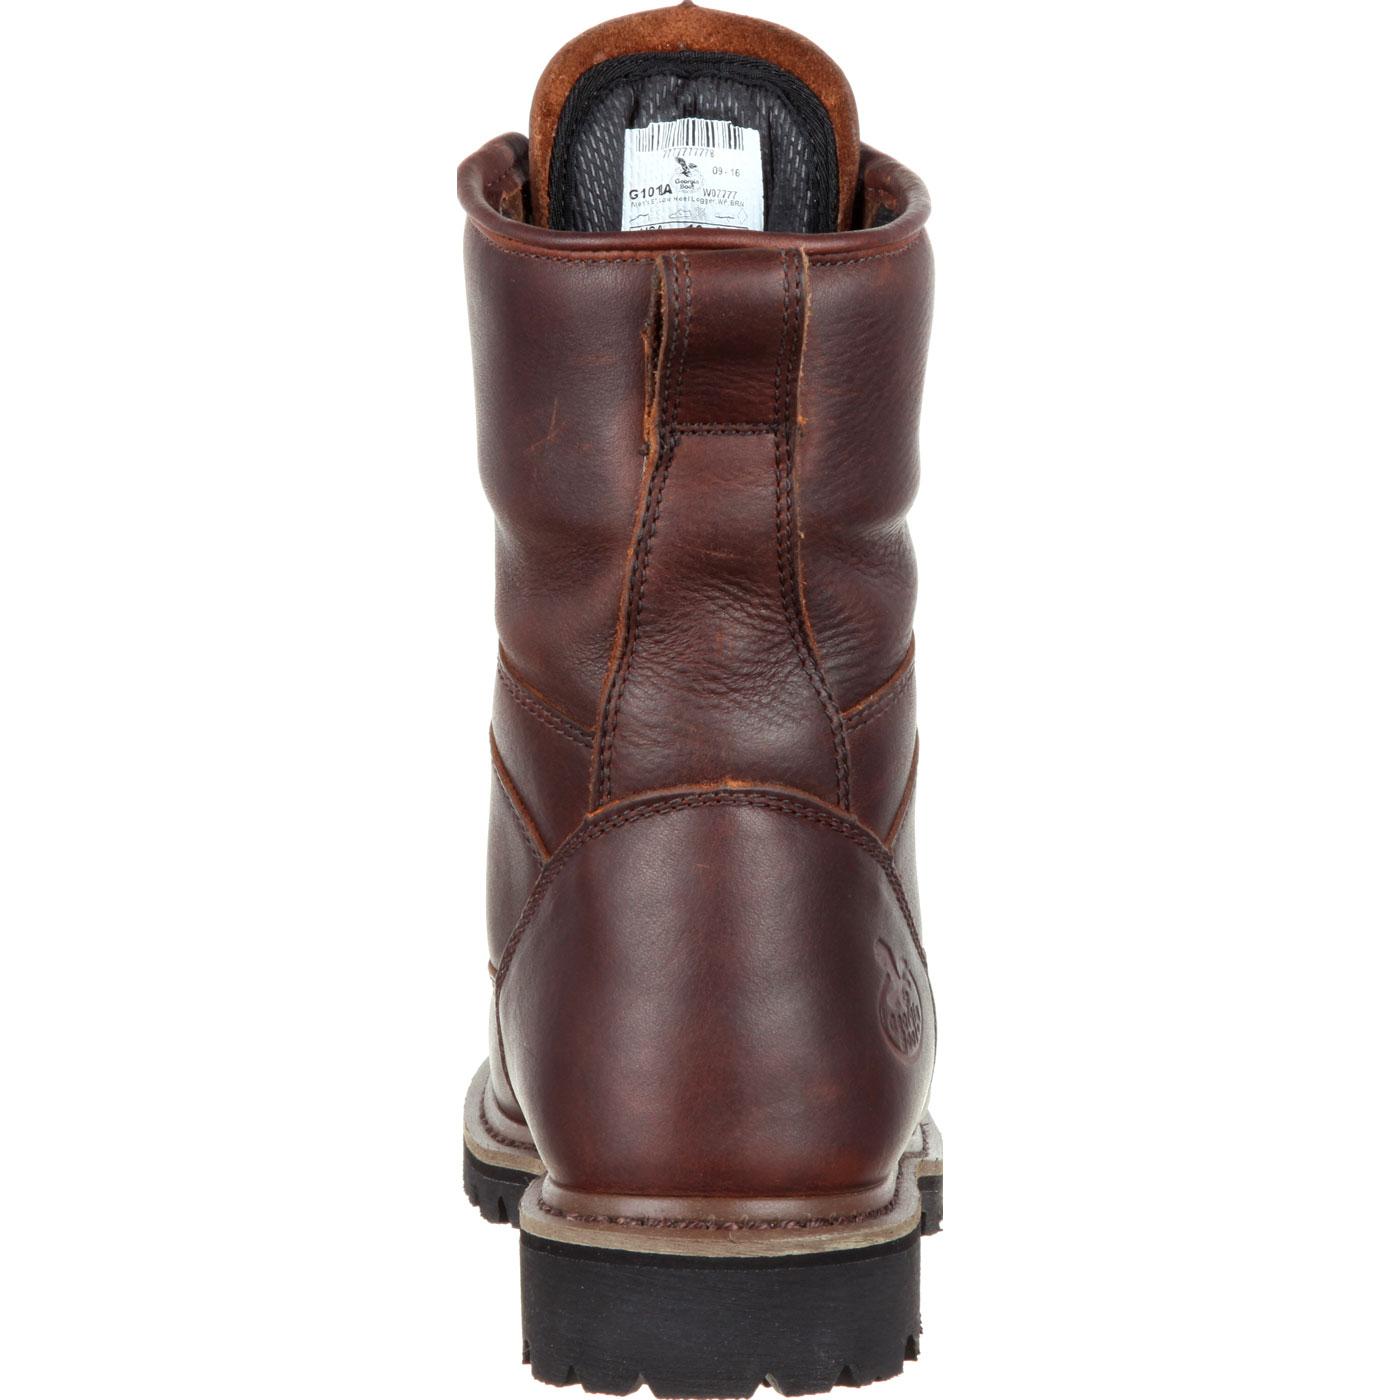 Georgia Boot: Brown Leather Waterproof Lace-to-Toe Work Boot